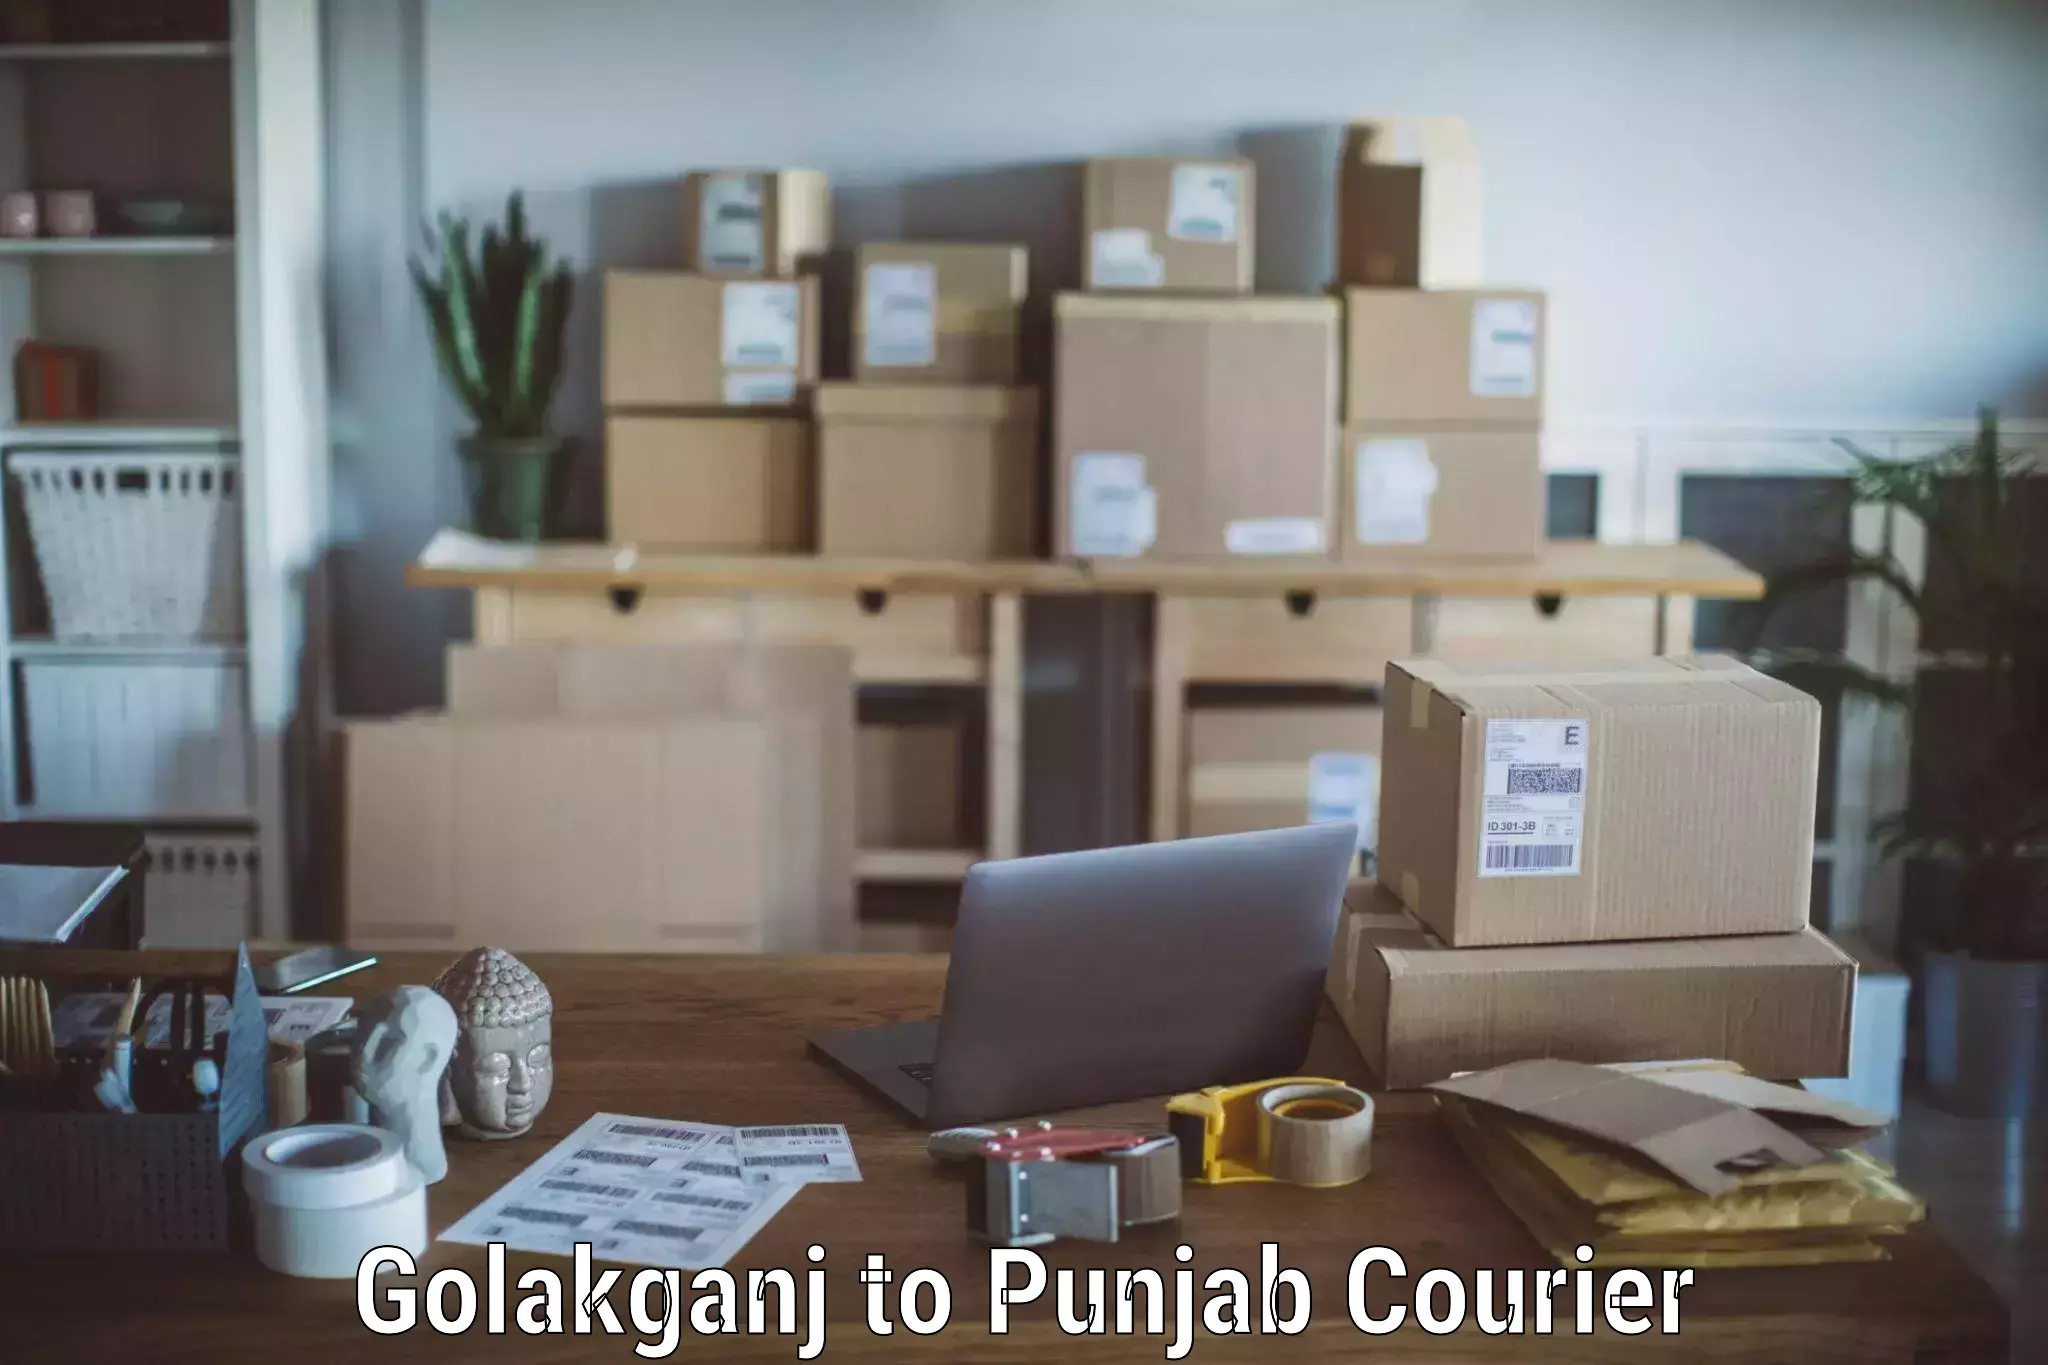 Professional movers and packers Golakganj to Punjab